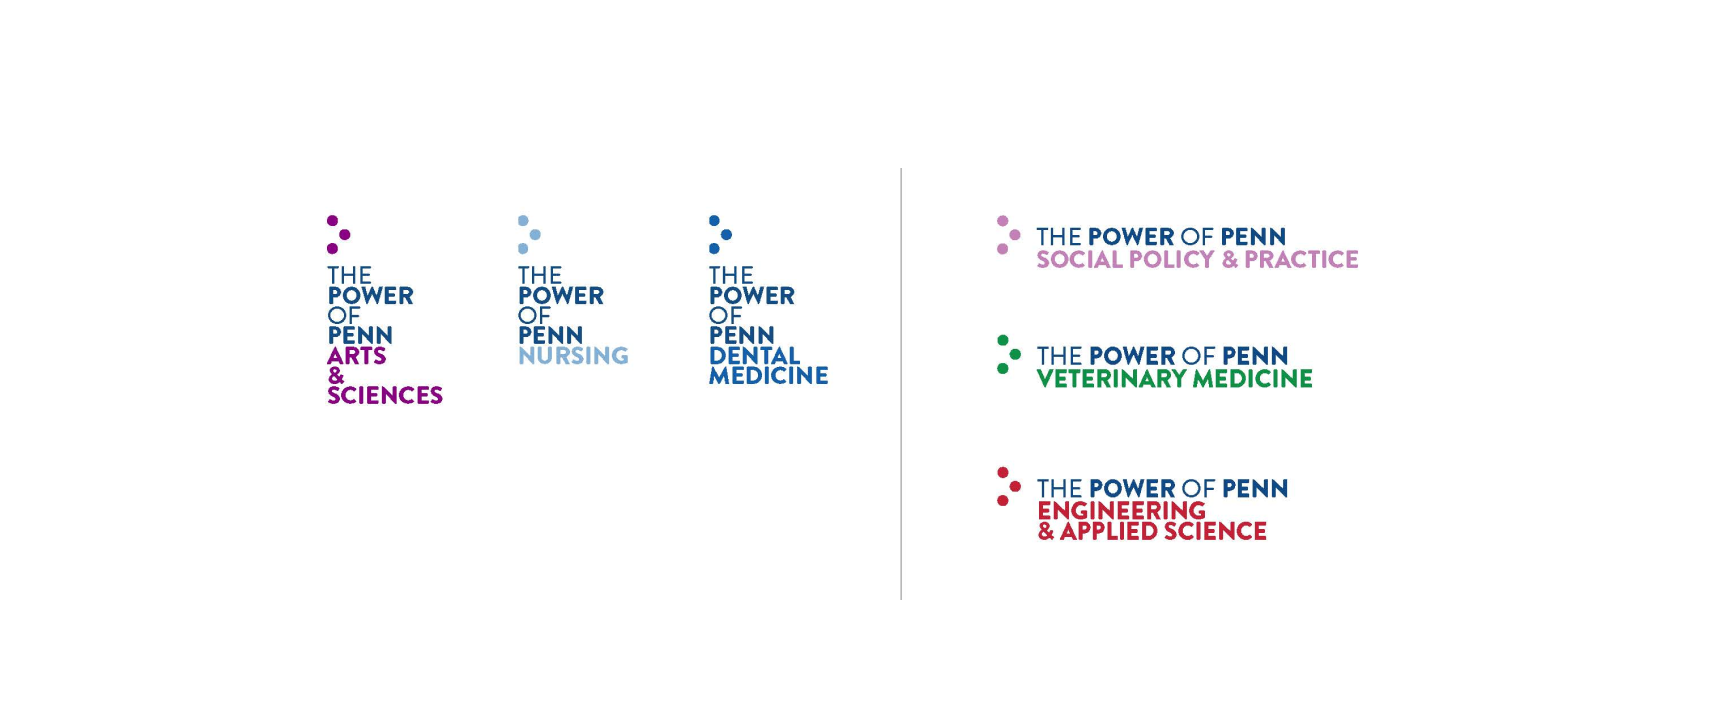 A graphic demonstrating different applications of the Power of Penn logo across the different colleges at UPenn.